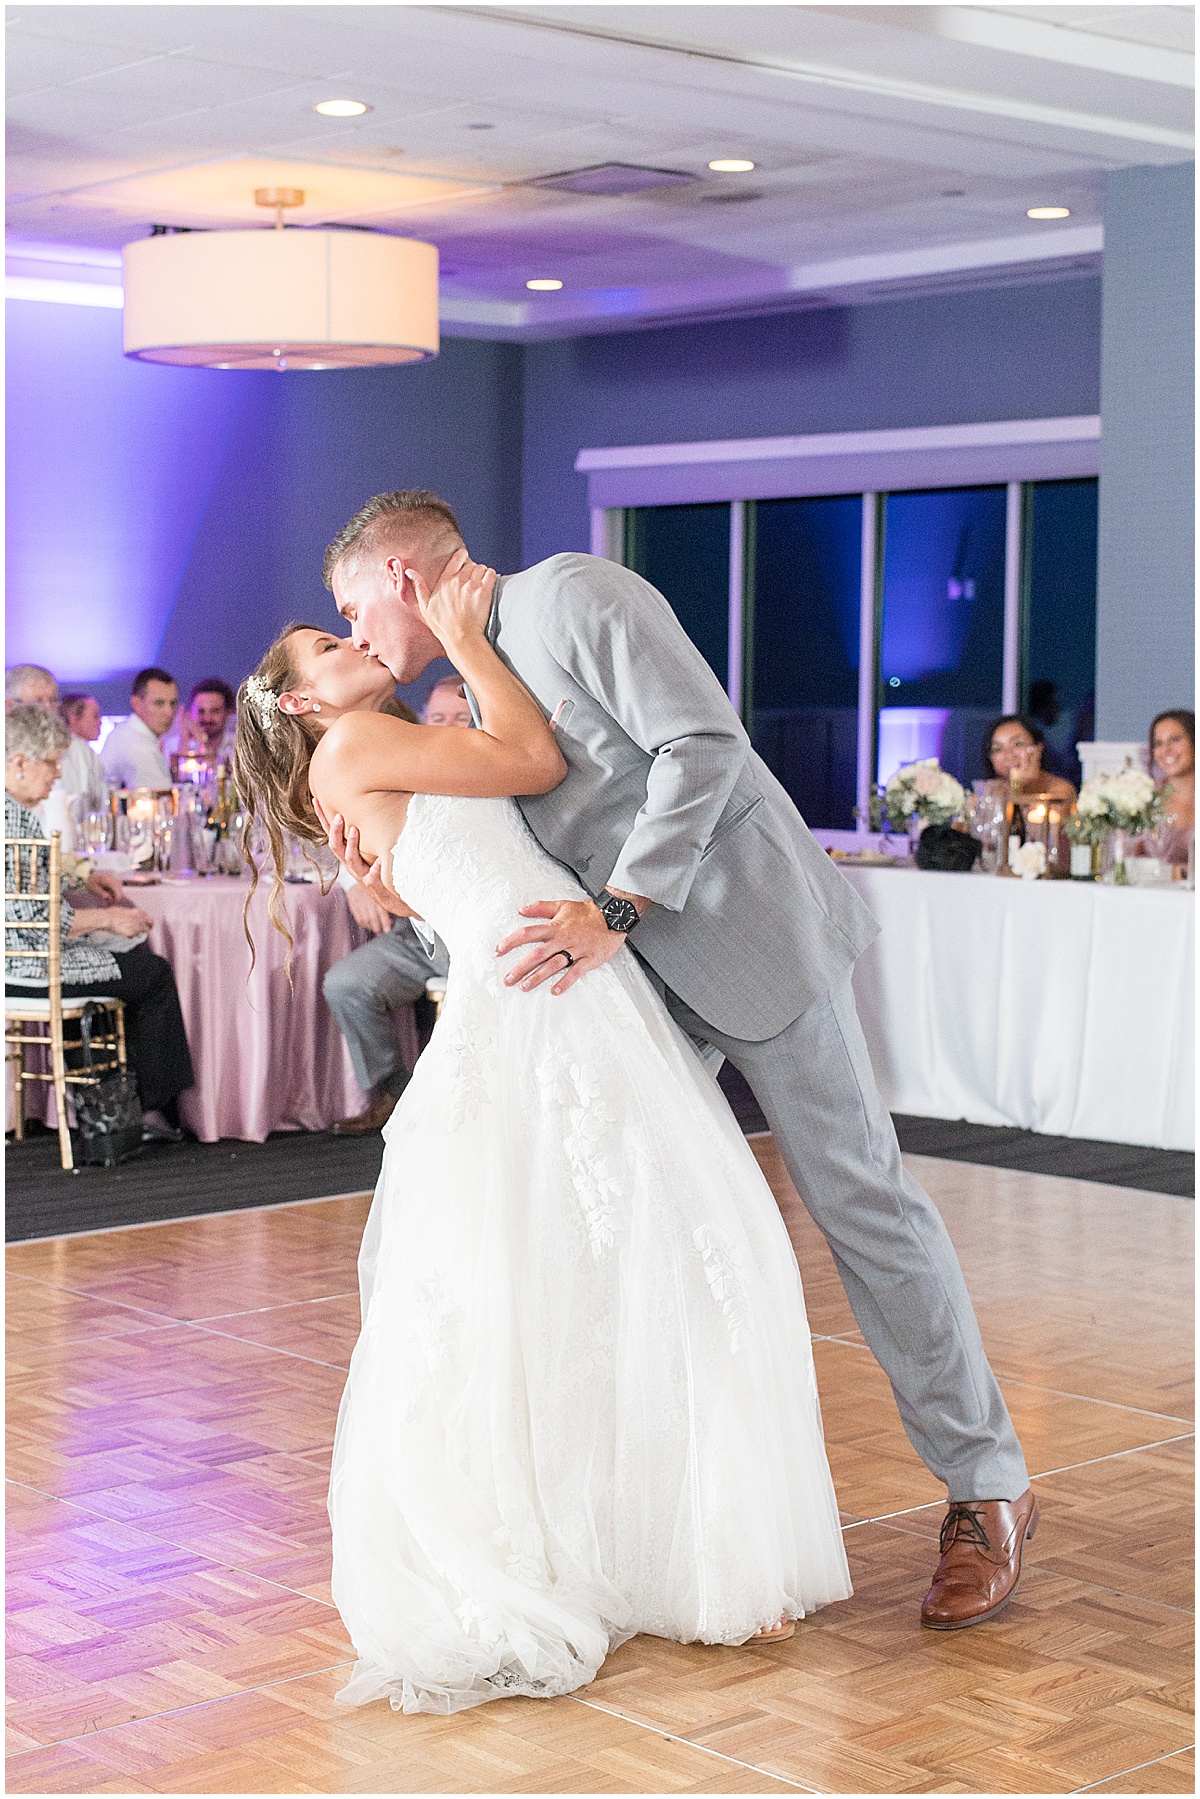 First dance during reception at the Lighthouse Restaurant in Cedar Lake, Indiana